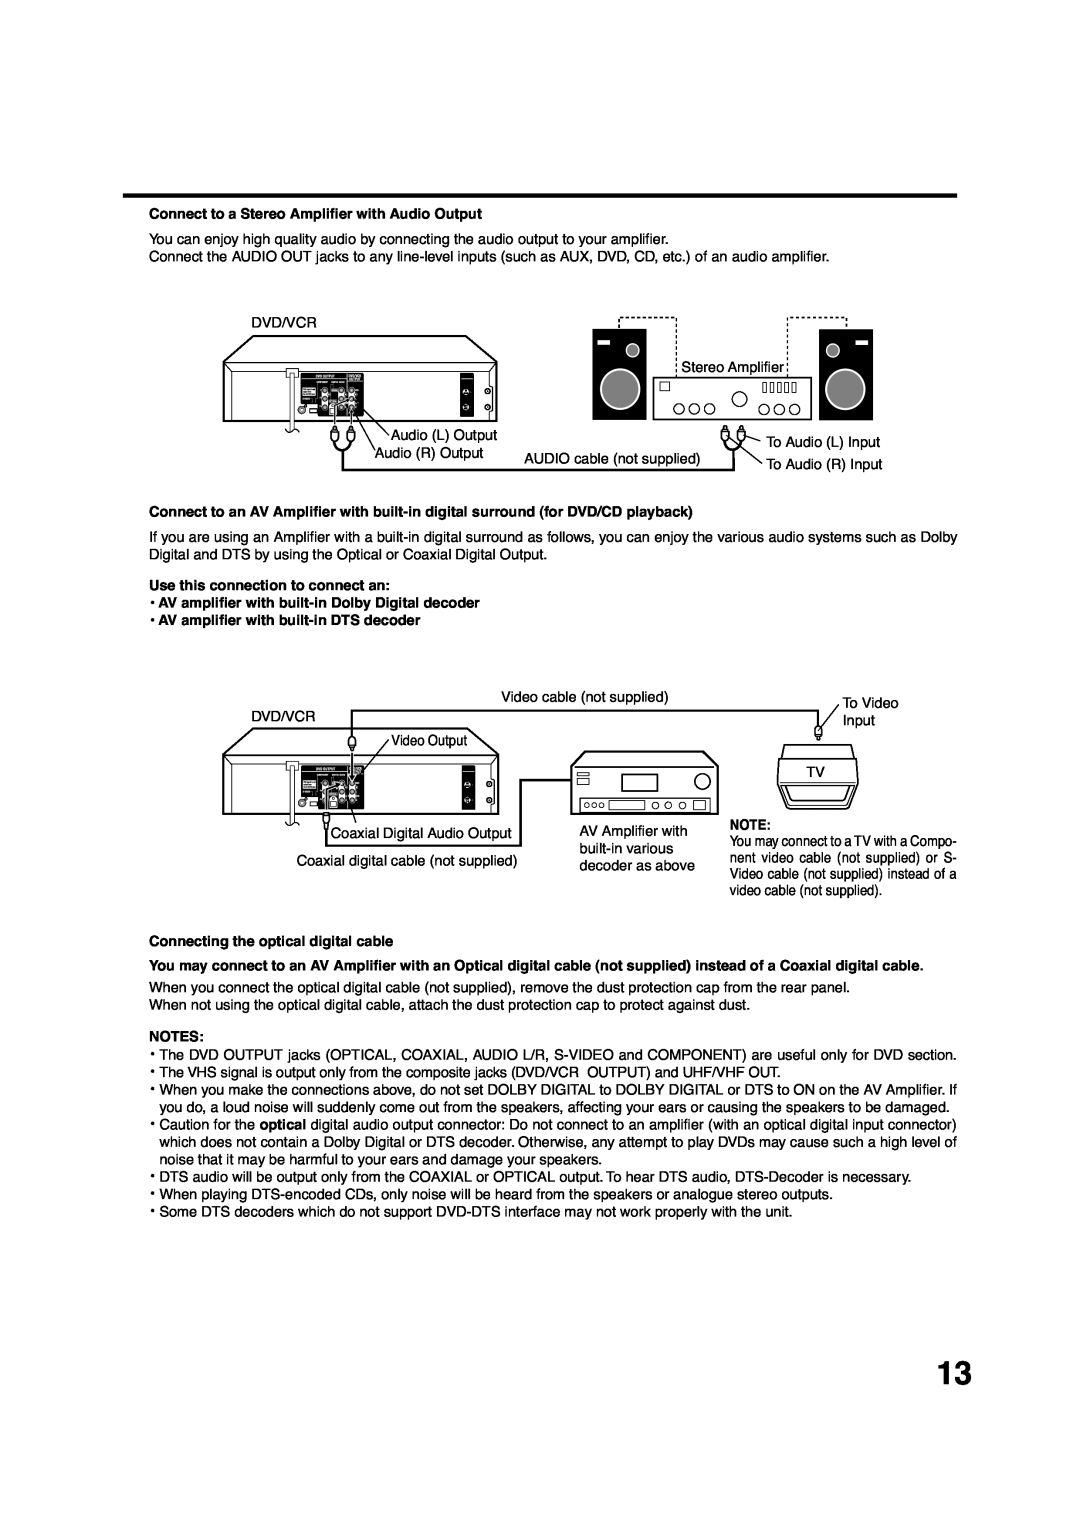 Pioneer DV-PT100 operating instructions Connect to a Stereo Amplifier with Audio Output, Use this connection to connect an 